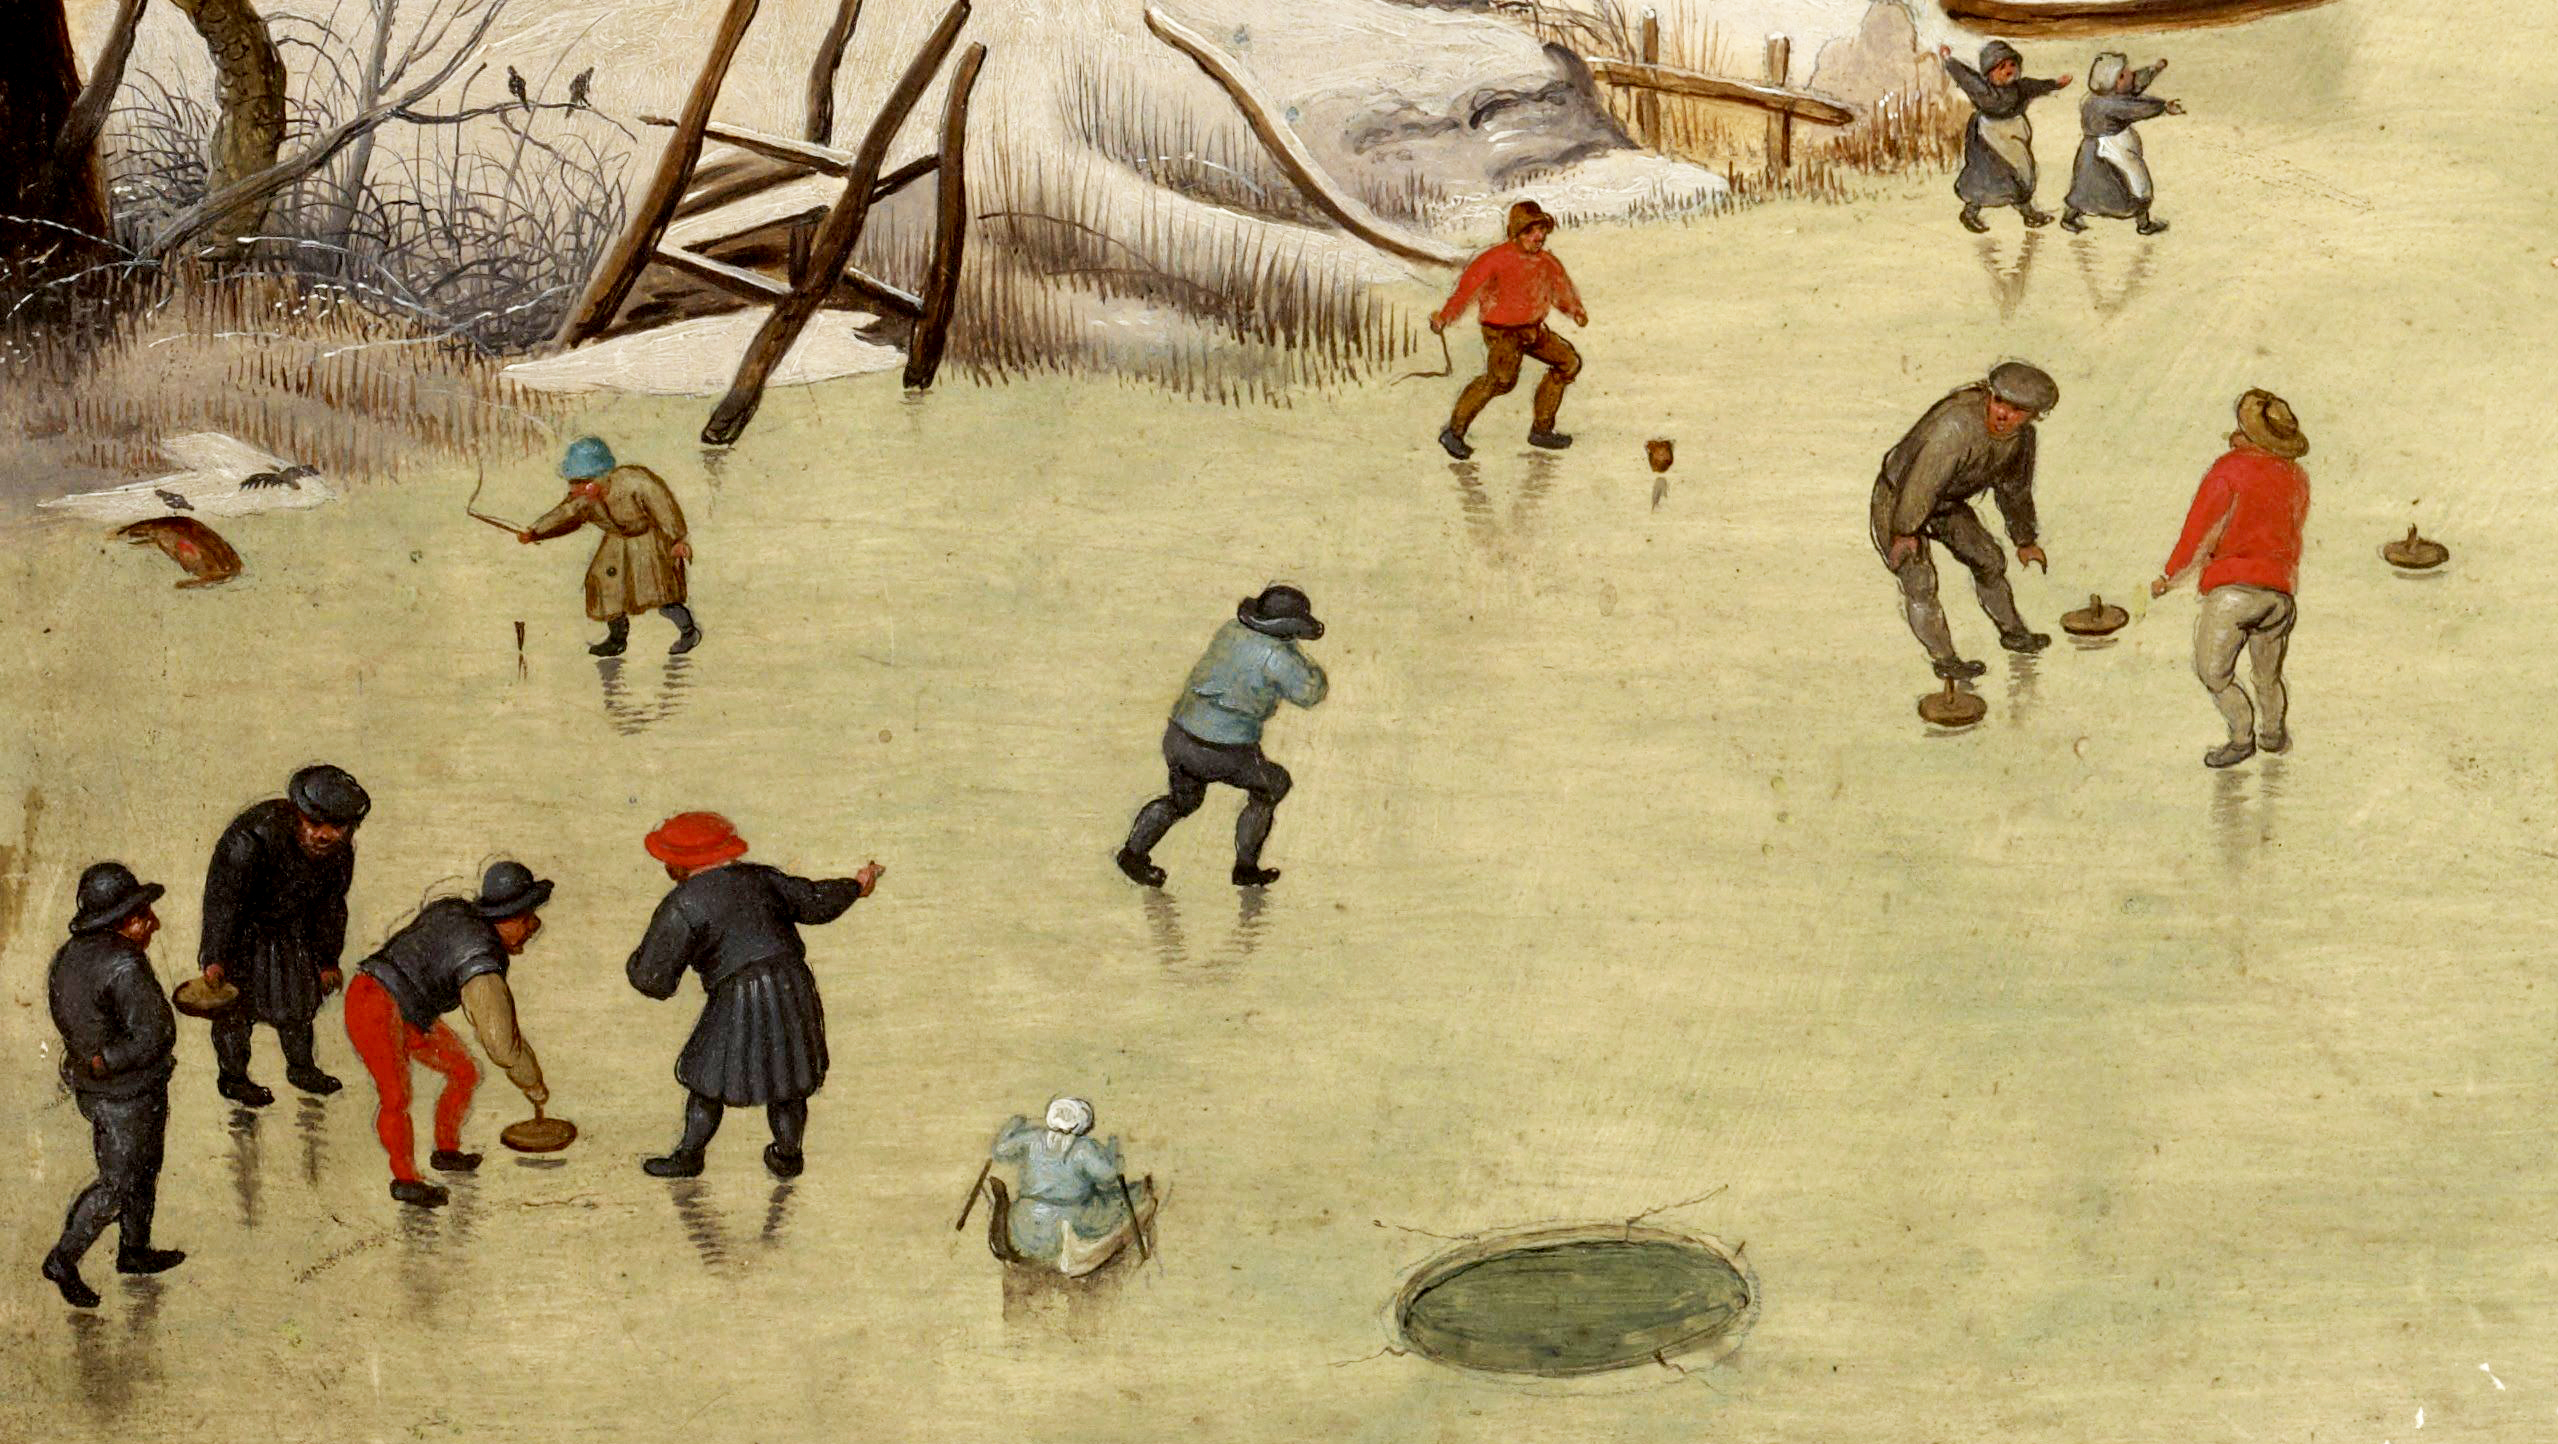 Detail of Pieter Bruegel’s painting “Winter Landscape with a Bird Trap” from 1631 shows people playing Eisstockschiessen – curling – on ice.